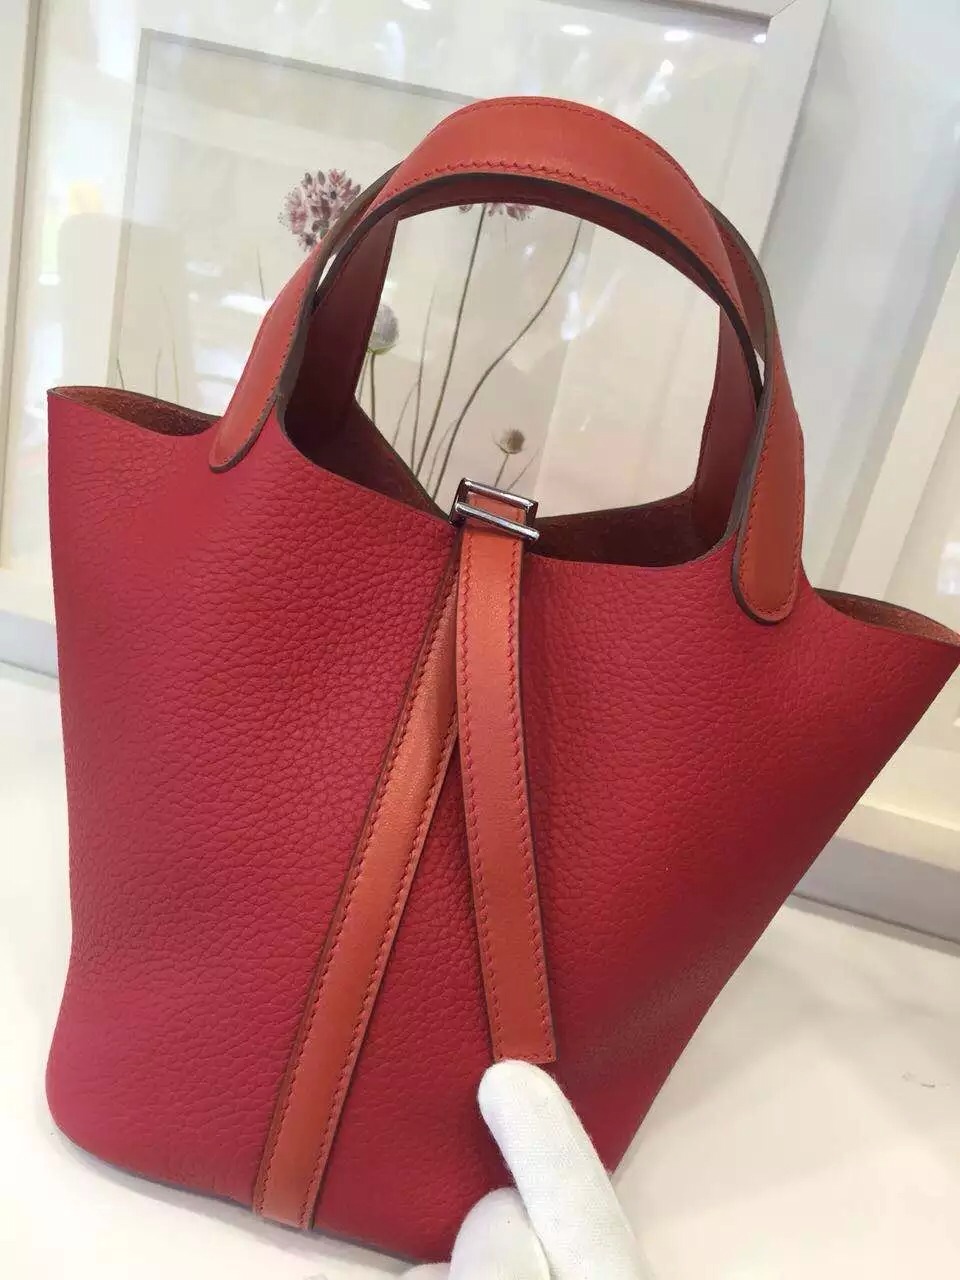 Discount Hermes Togo Leather&#038; Swift Leather Q5 Chinese Red Picotin Lock Tote Bag Two Size